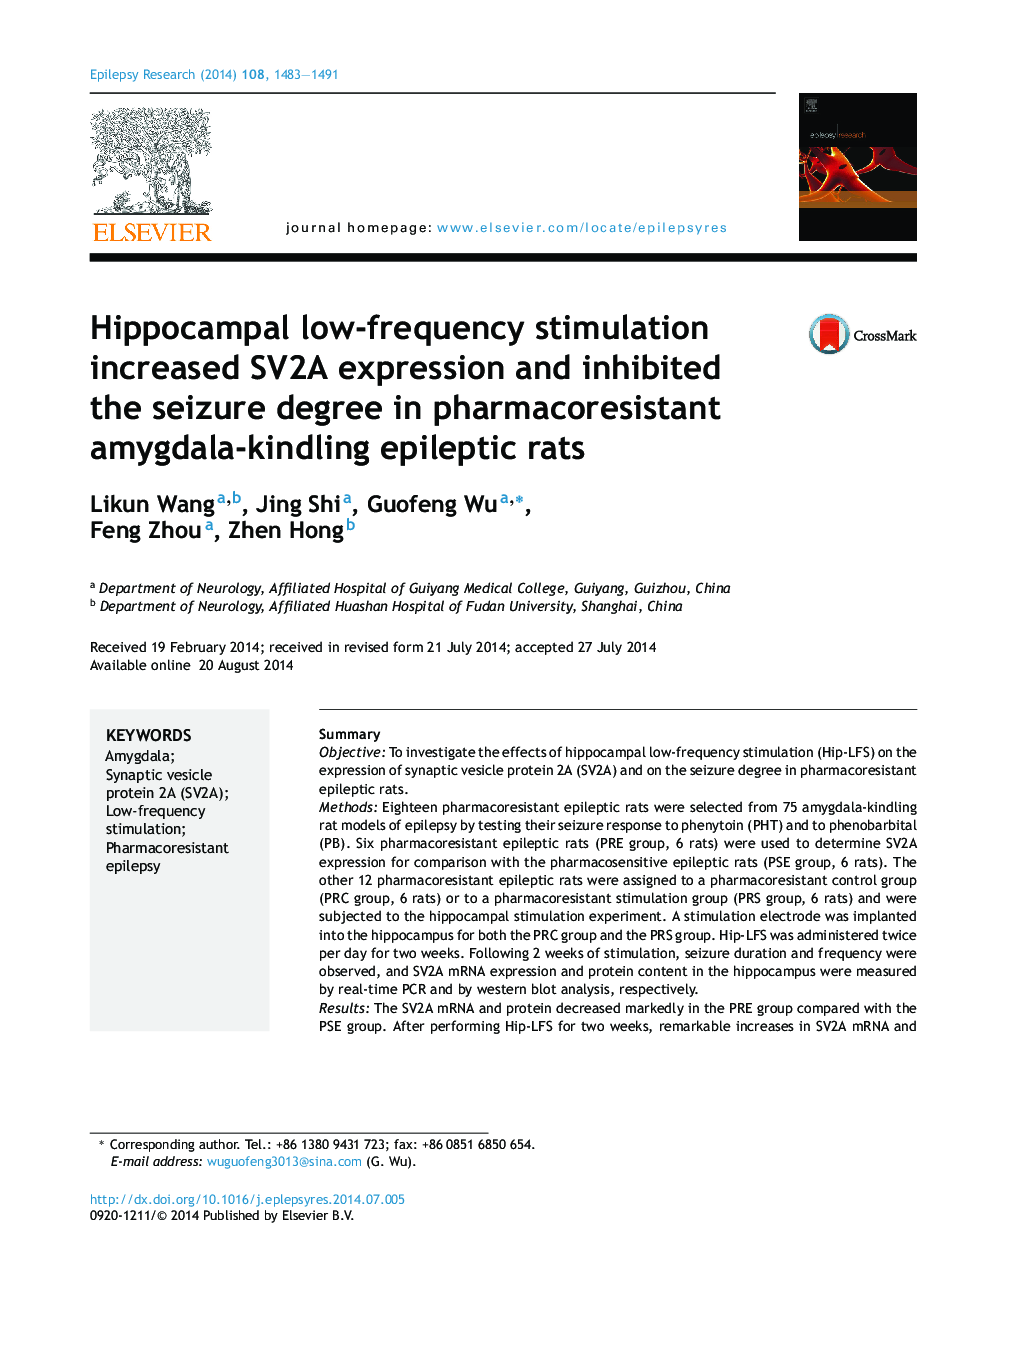 Hippocampal low-frequency stimulation increased SV2A expression and inhibited the seizure degree in pharmacoresistant amygdala-kindling epileptic rats